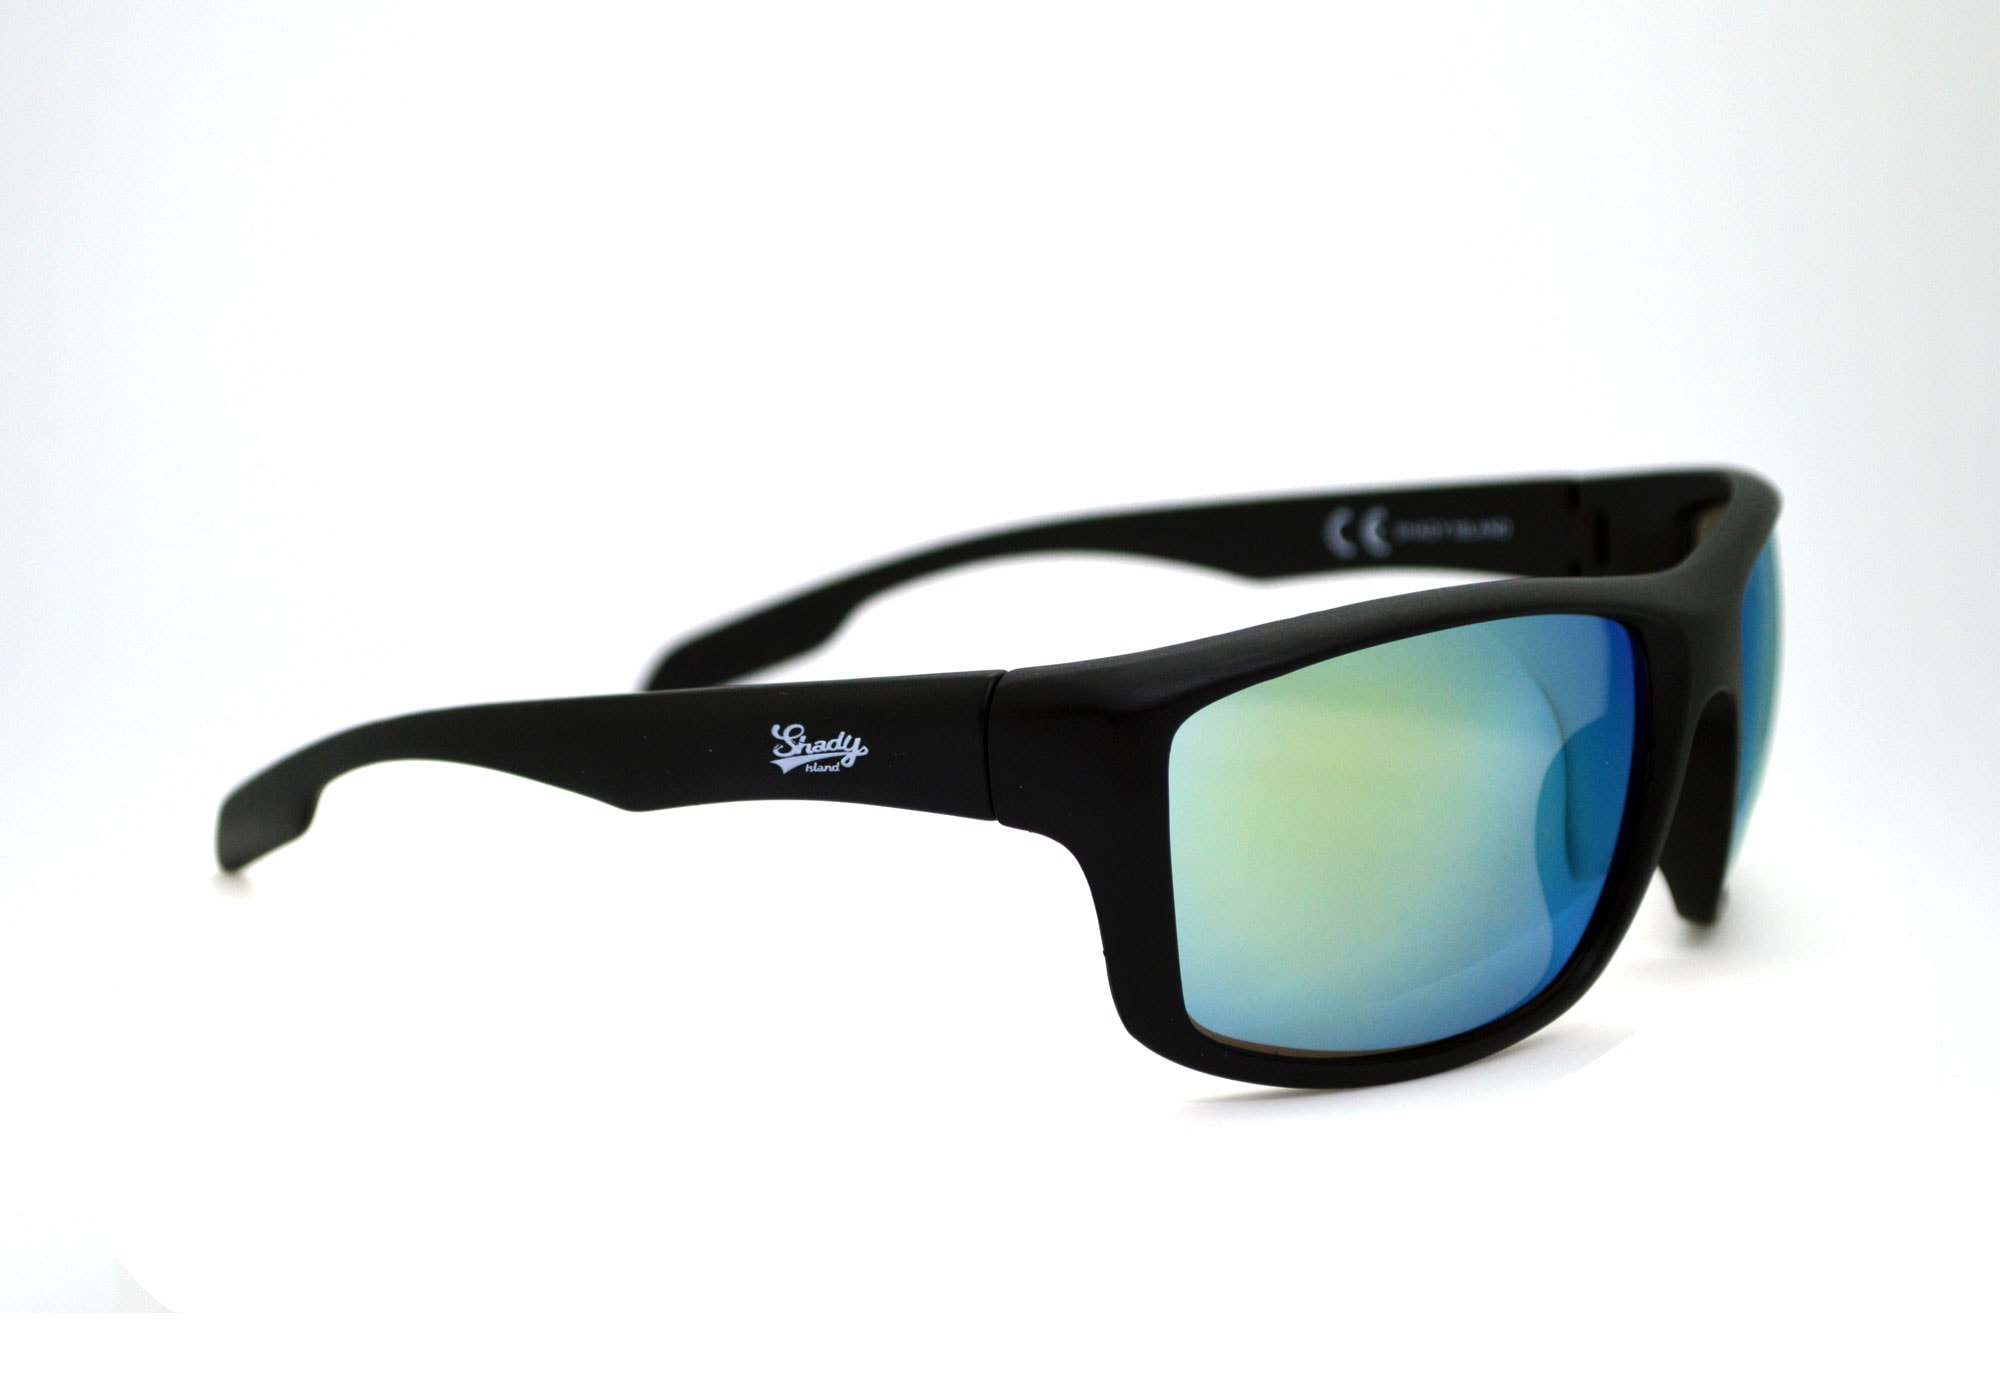 Shady Black Sporty Sunglasses with Light Blue Tint » Sporty » Jamaican ...